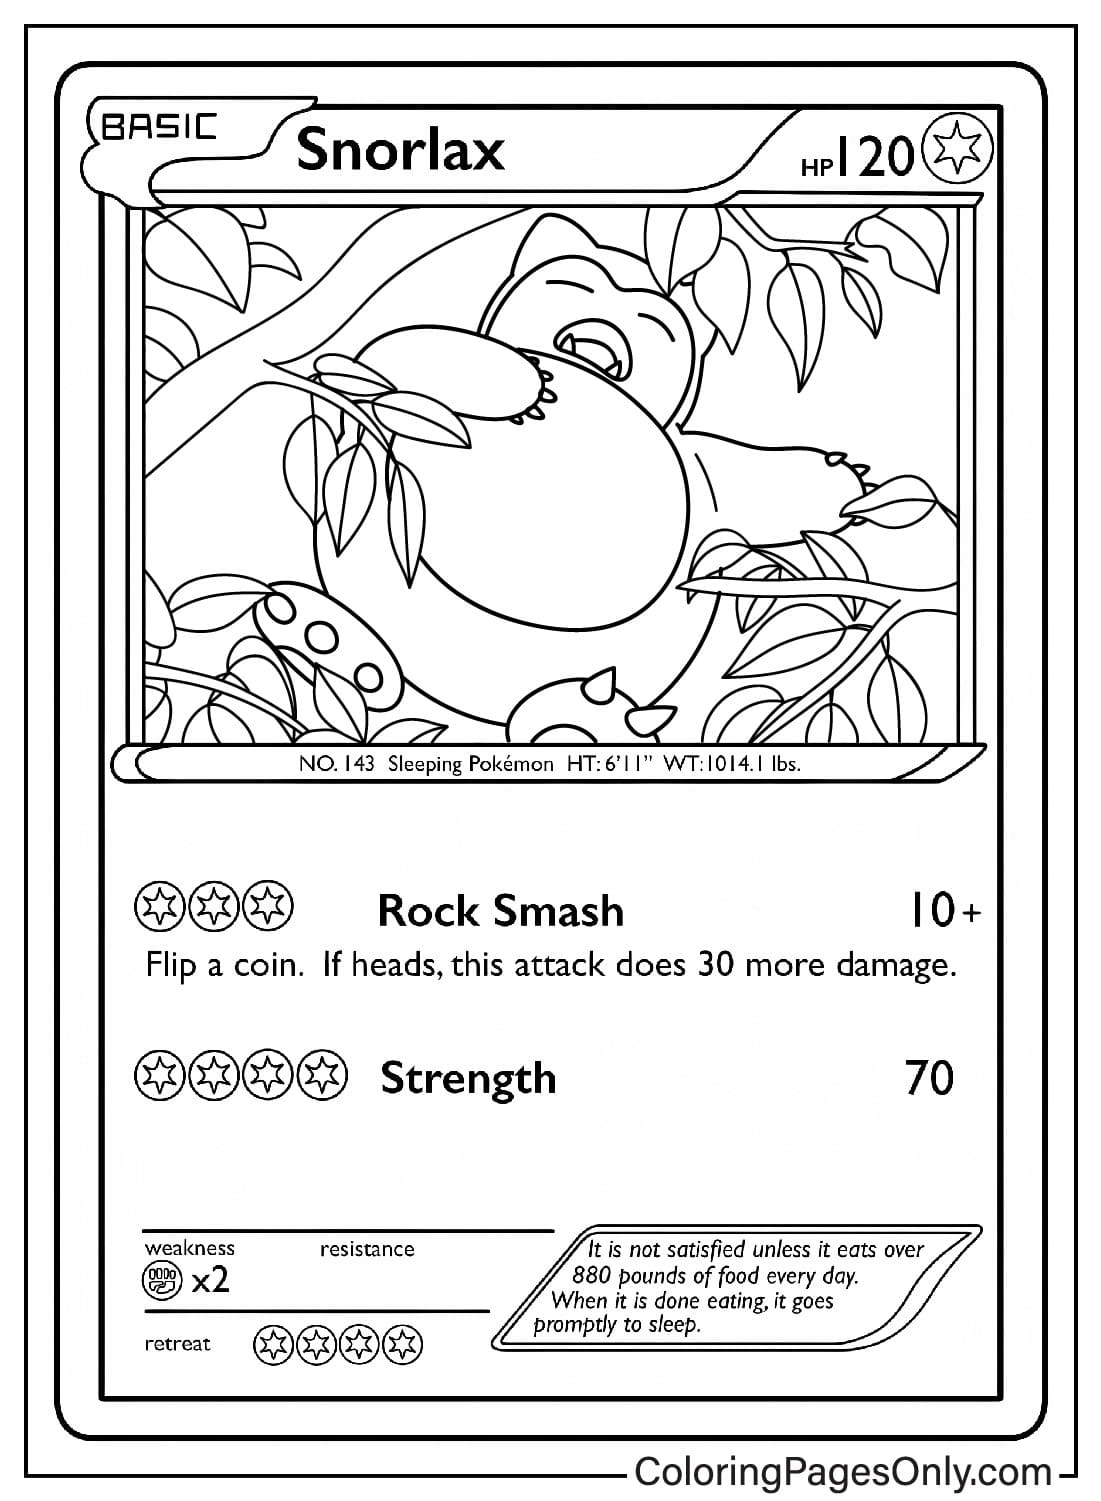 Snorlax Pokemon Card Coloring Page from Pokemon Card